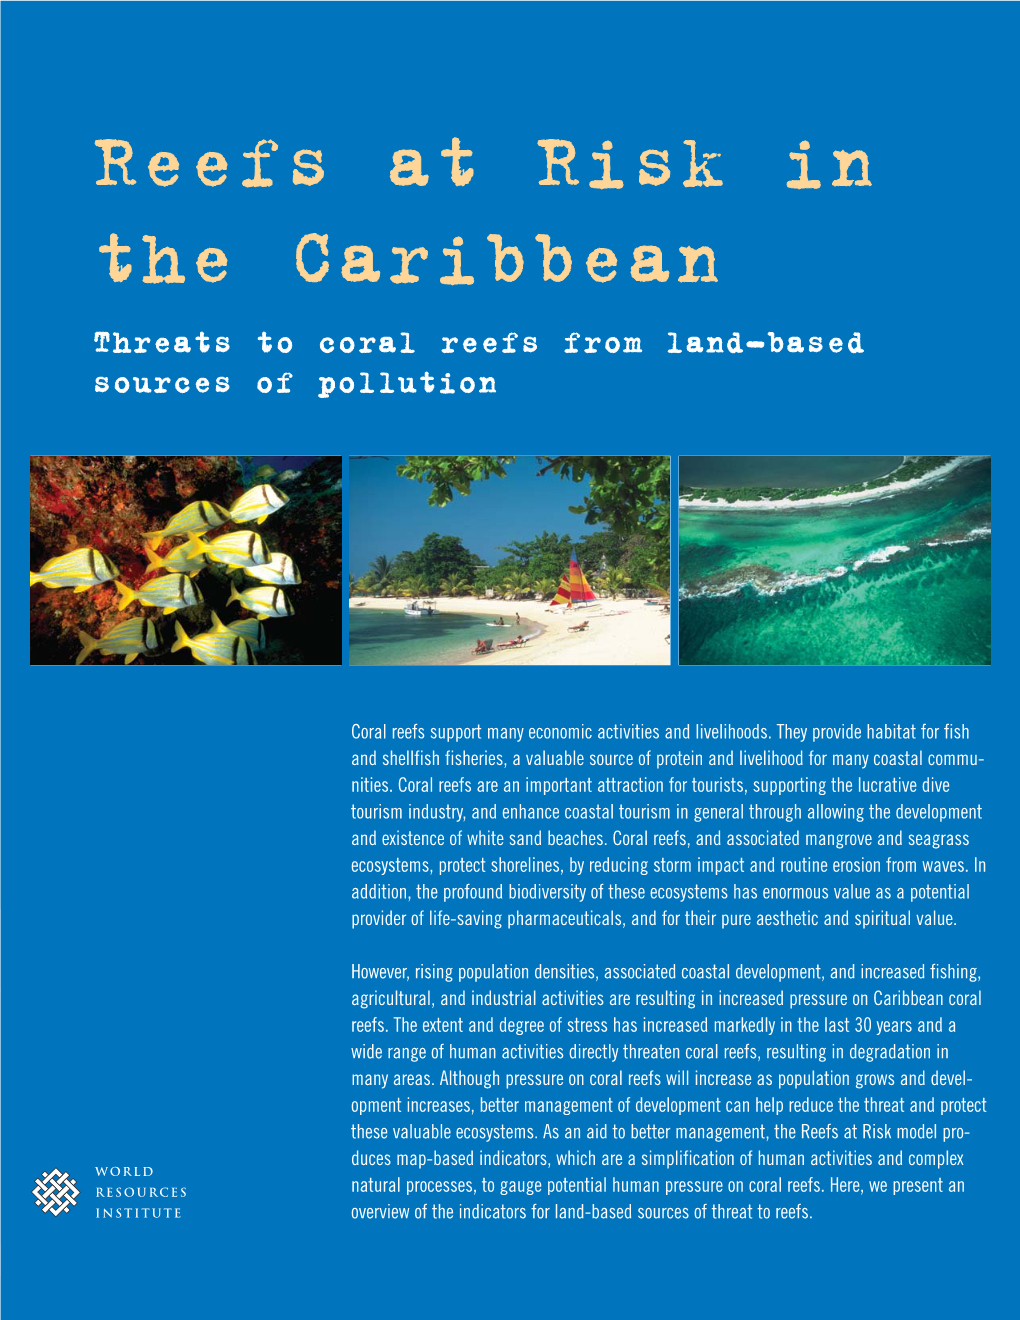 Reefs at Risk in the Caribbean, Will Be Released in the Fall of 2004